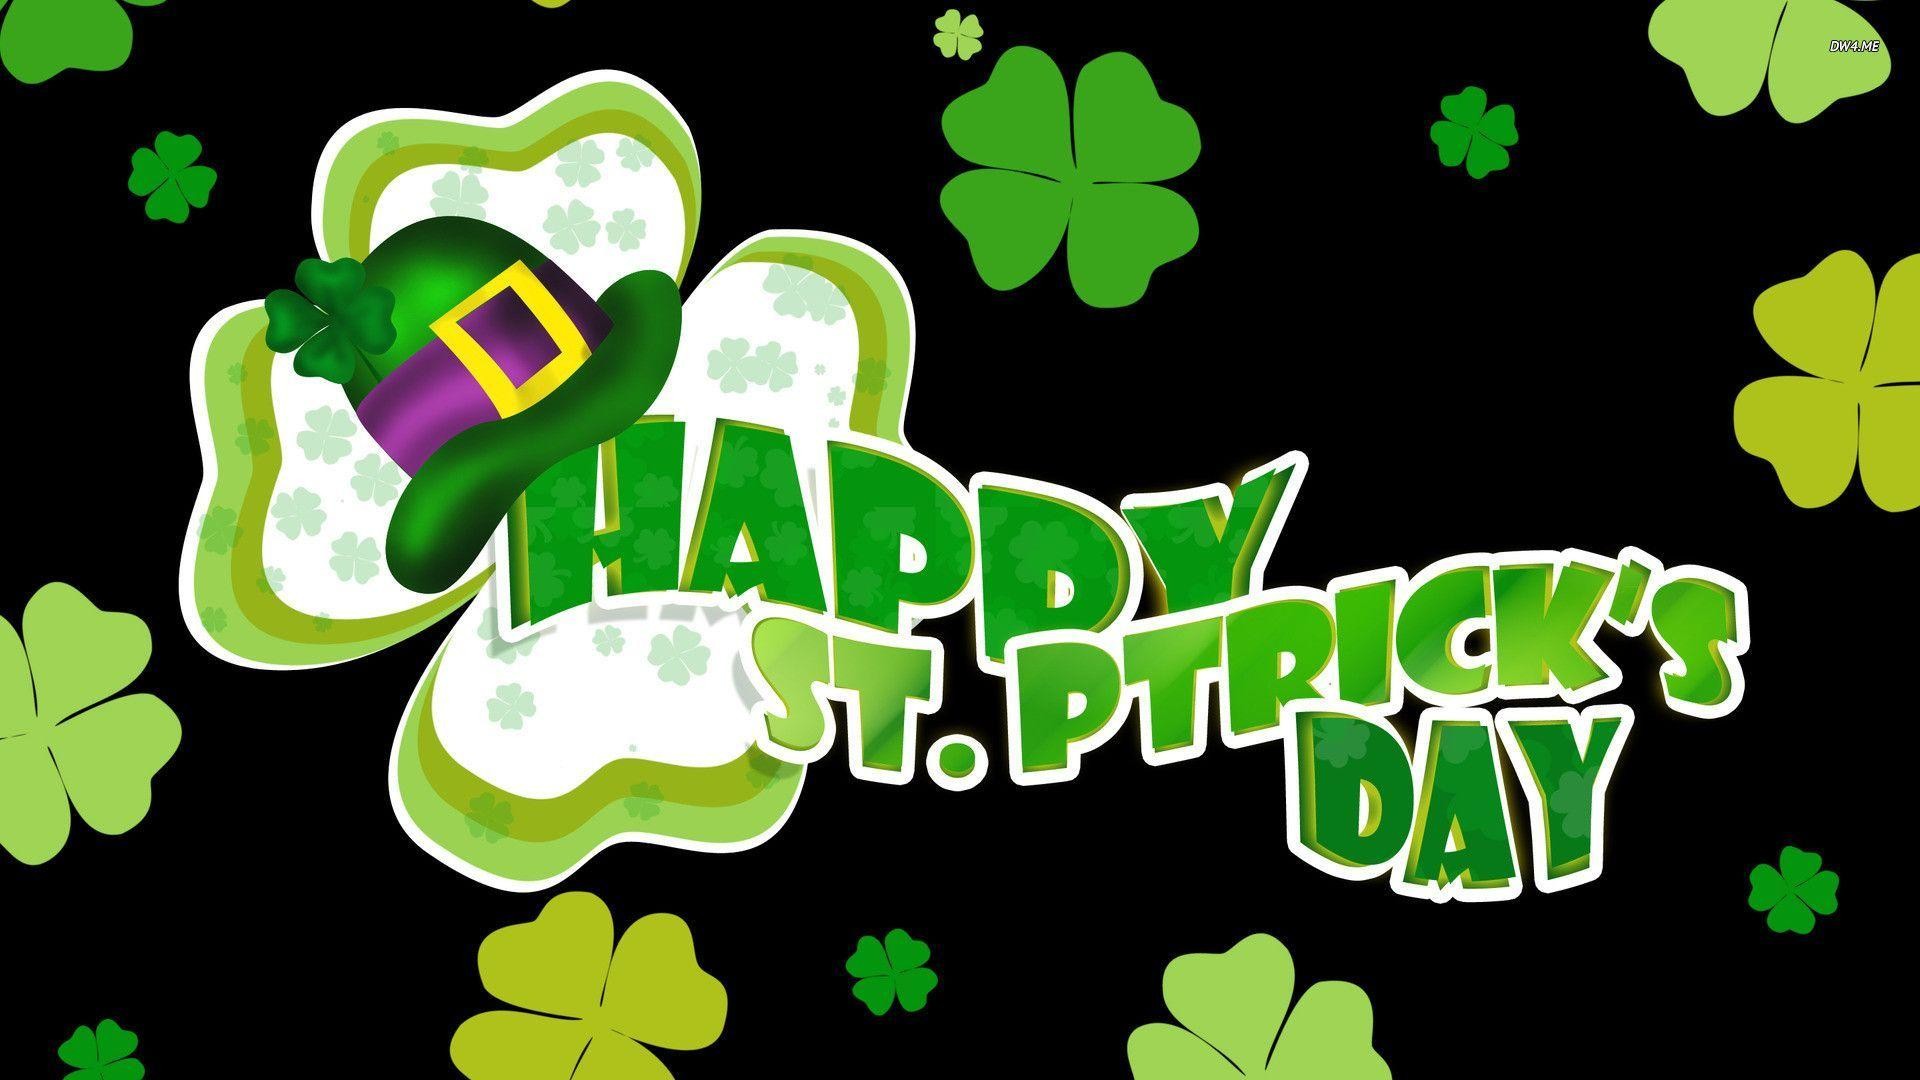 1920x1080 Happy St. Patrick's Day wallpaper - Holiday wallpapers - #